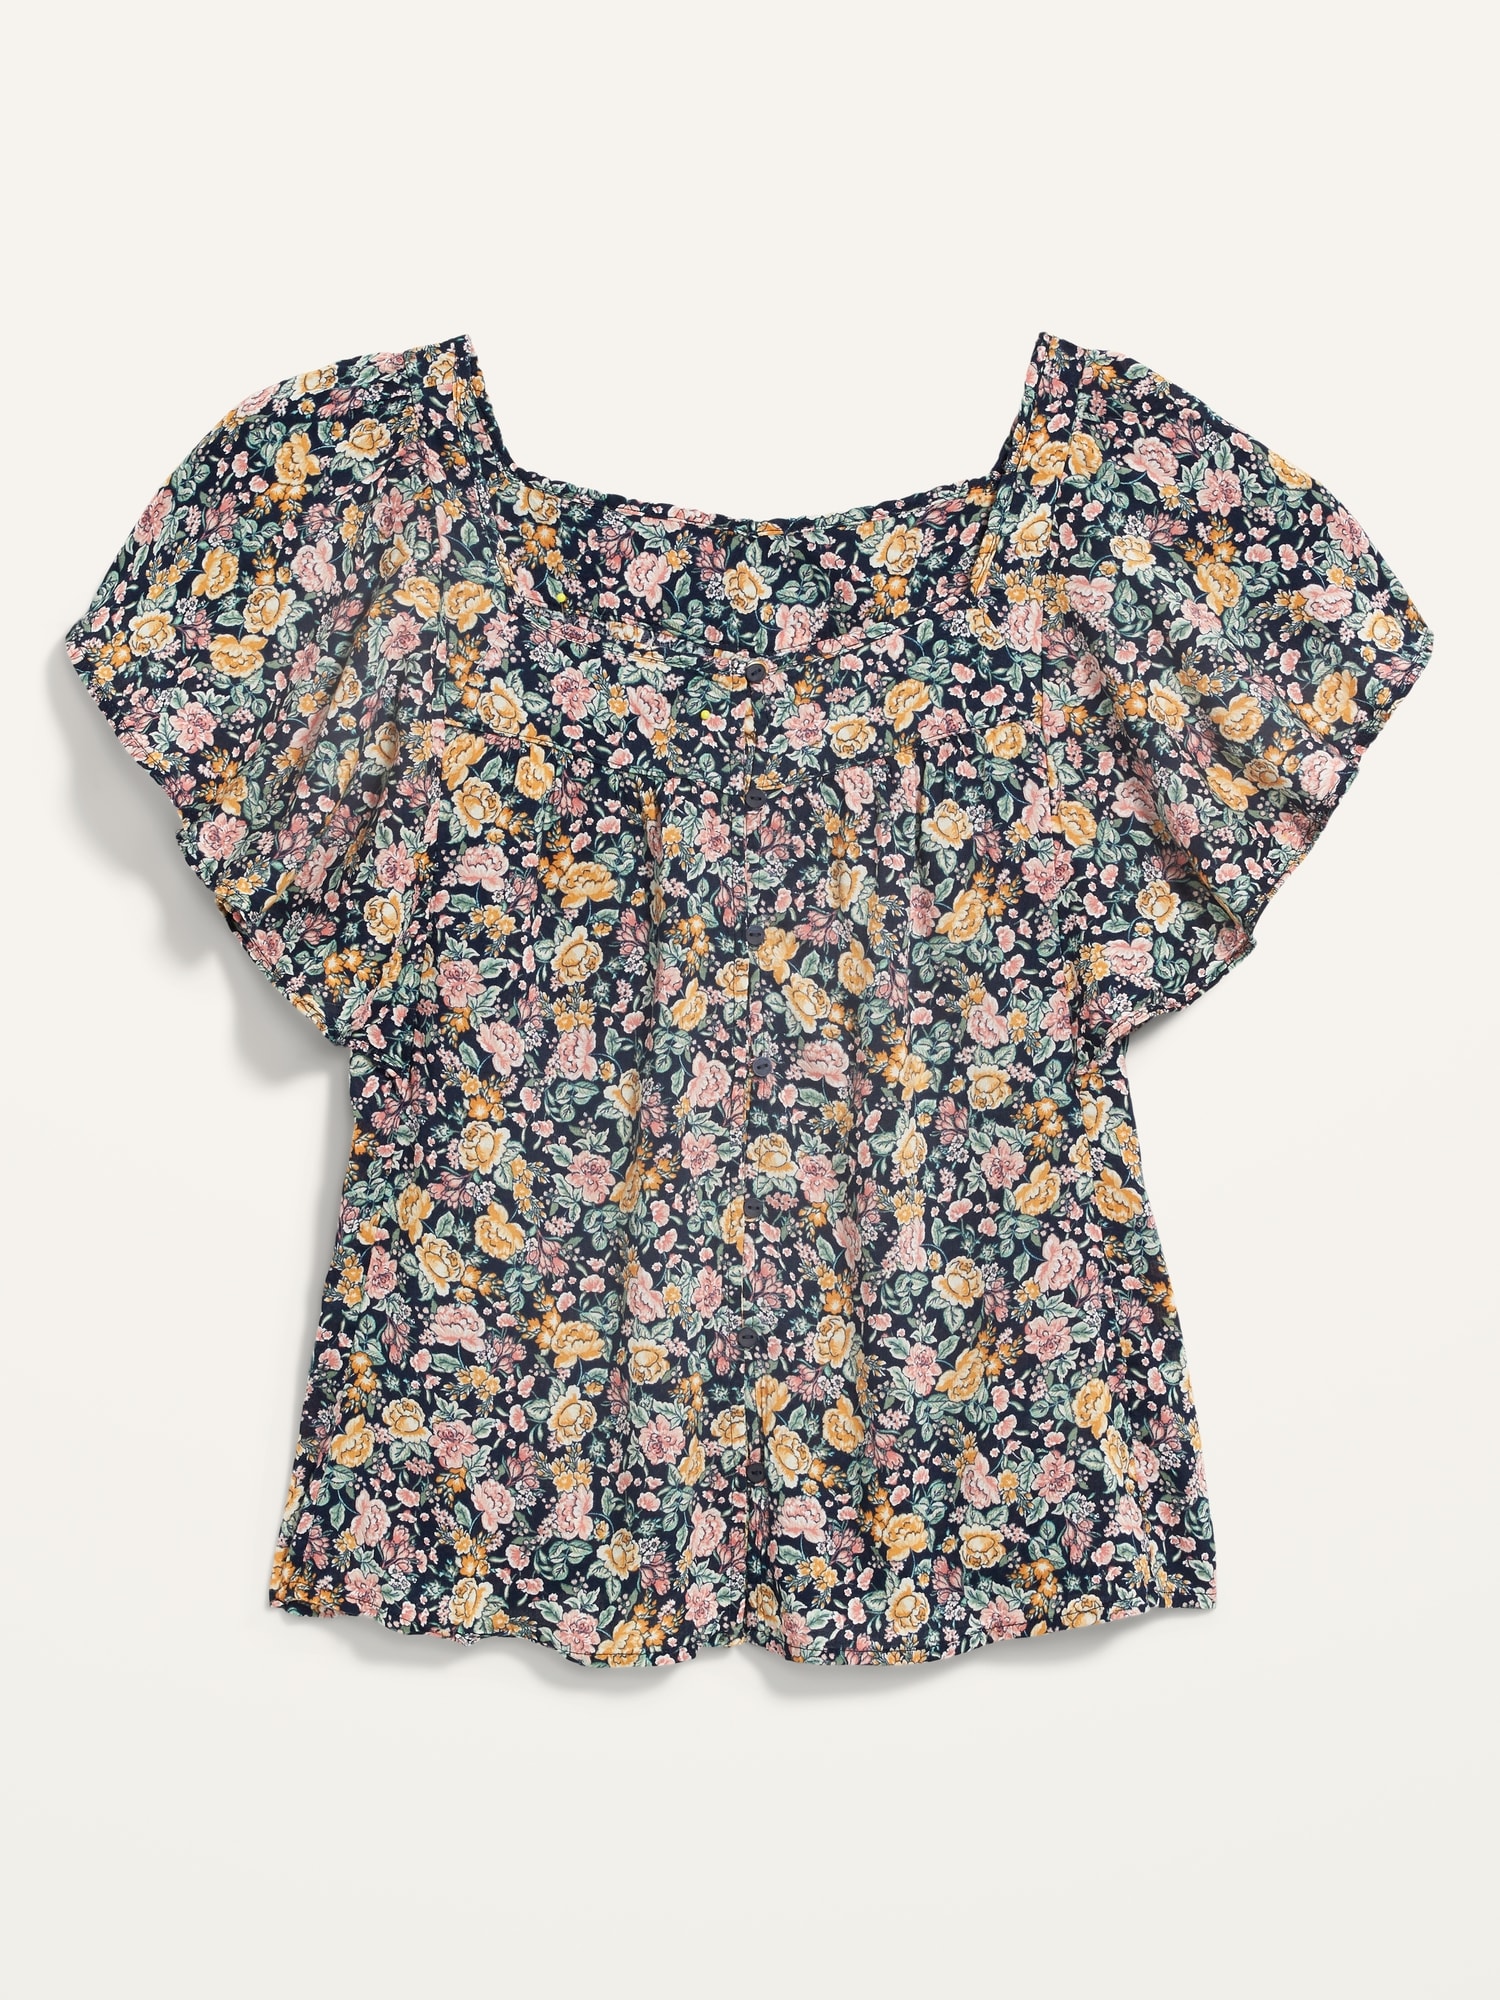 Stylish Navy Floral Square Neck Top